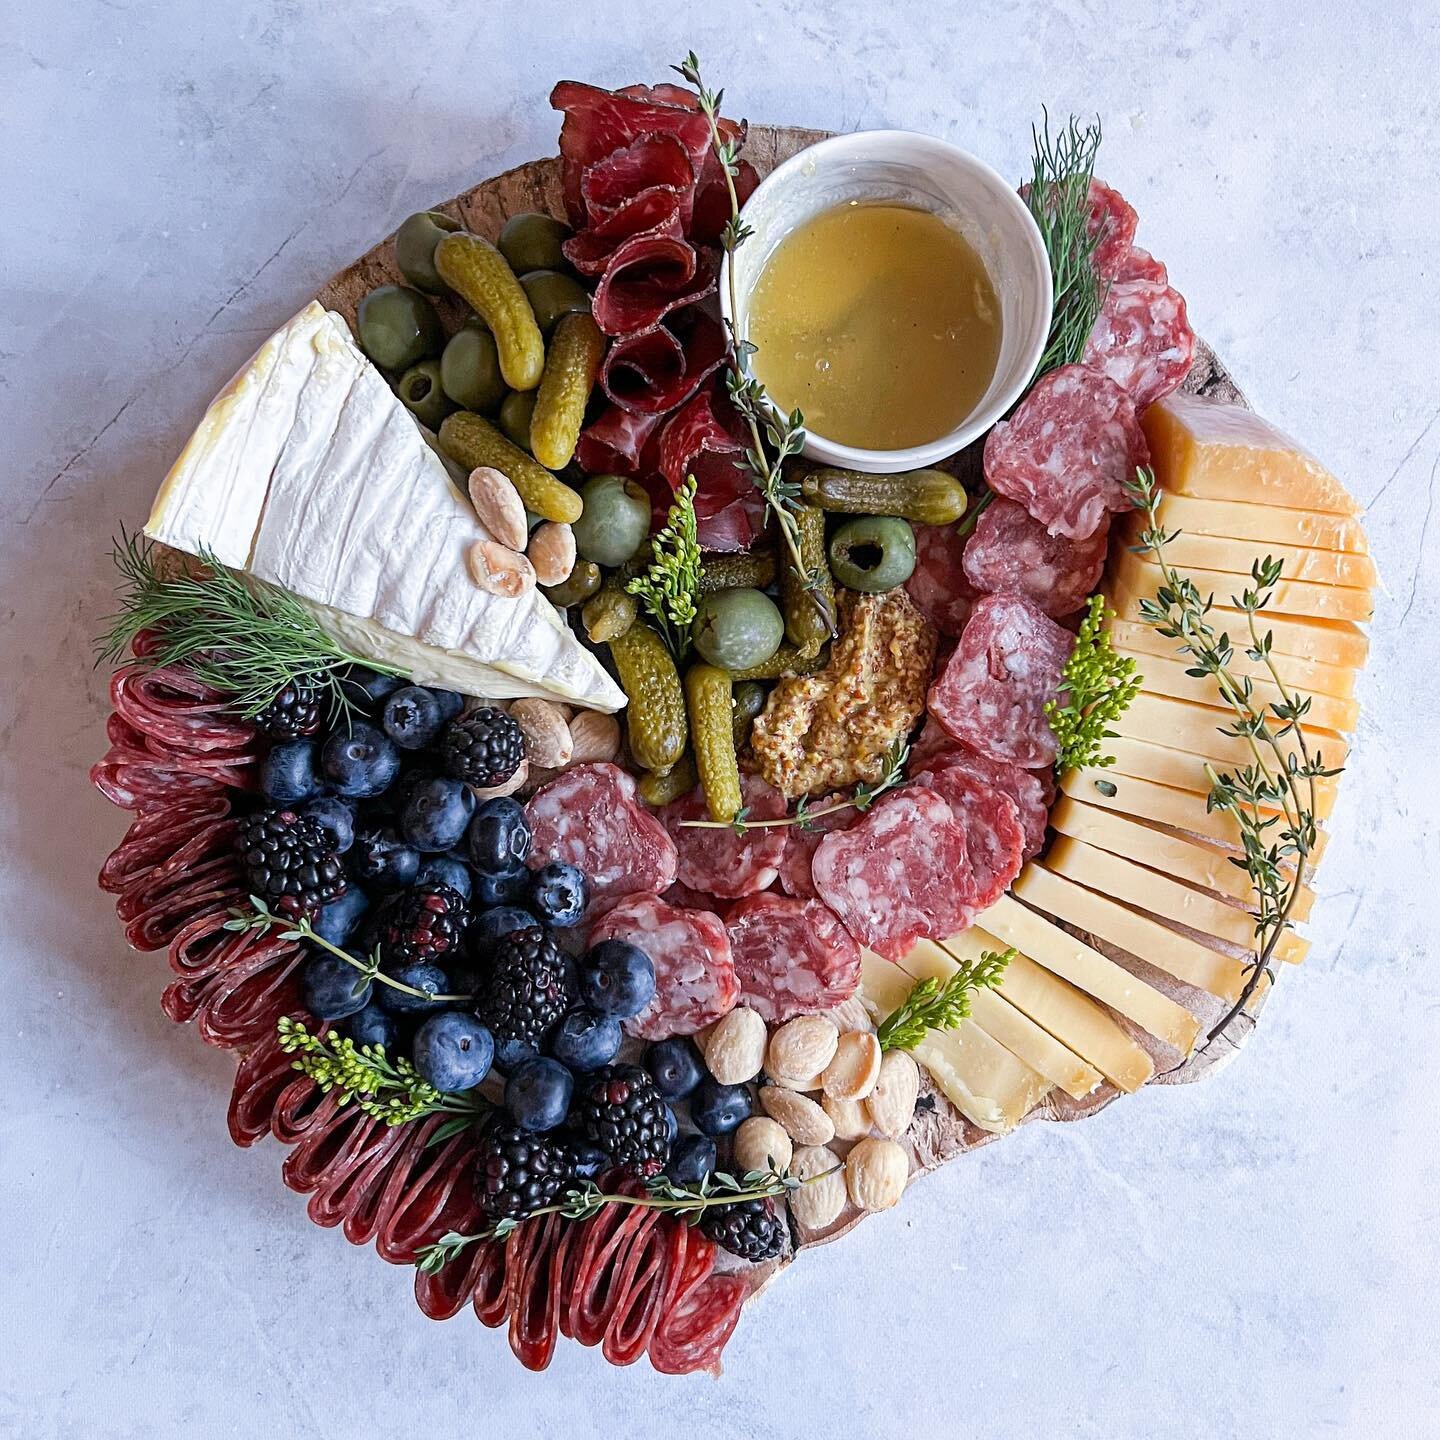 teamed up with @brooklyncured to create this elevated charcuterie board.

i am a big fan of both their products and purpose - all pasture raised AND contain no antibiotics, nitrites/nitrates, hormones, or animal byproduct. 

this board features the c